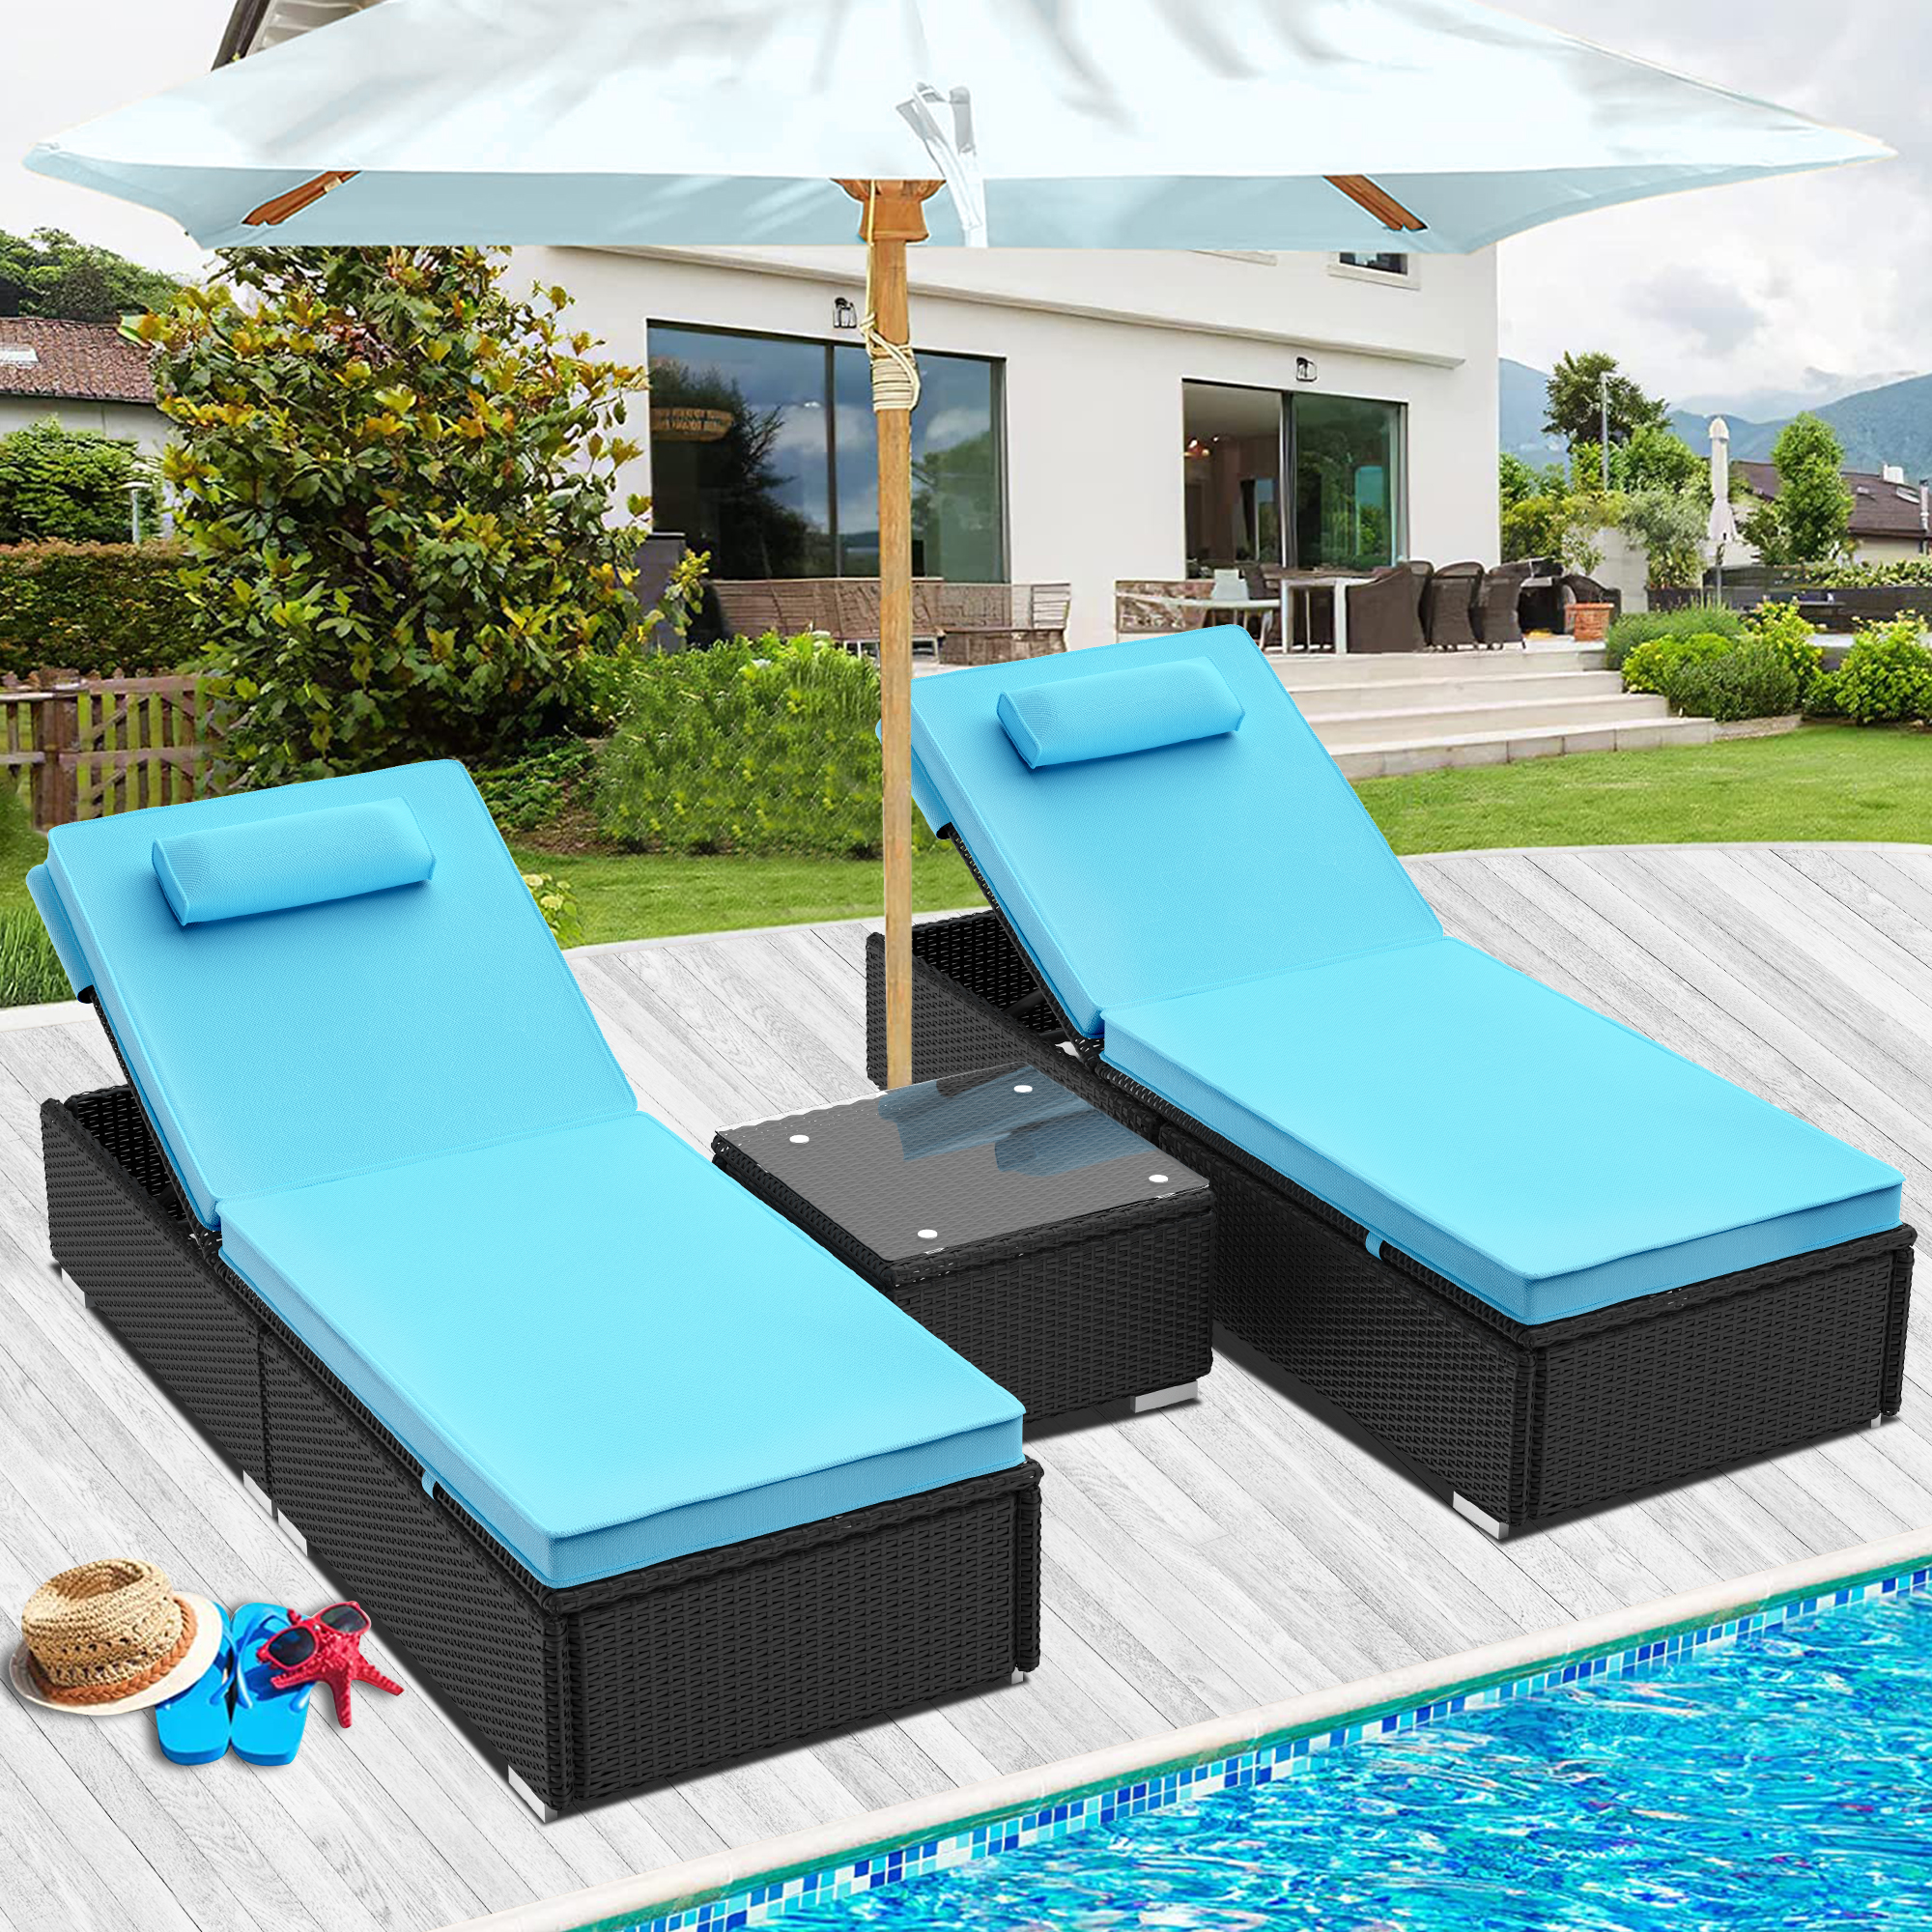 SESSLIFE 2 PCS Lounge Chair for Outside, Adjustable 5 Position Rattan Wicker Outdoor Chaise Lounge with Head Pillow & Thickened Cushion for Poolside, Patio, Garden, Deck (2, Light Blue) - image 2 of 8